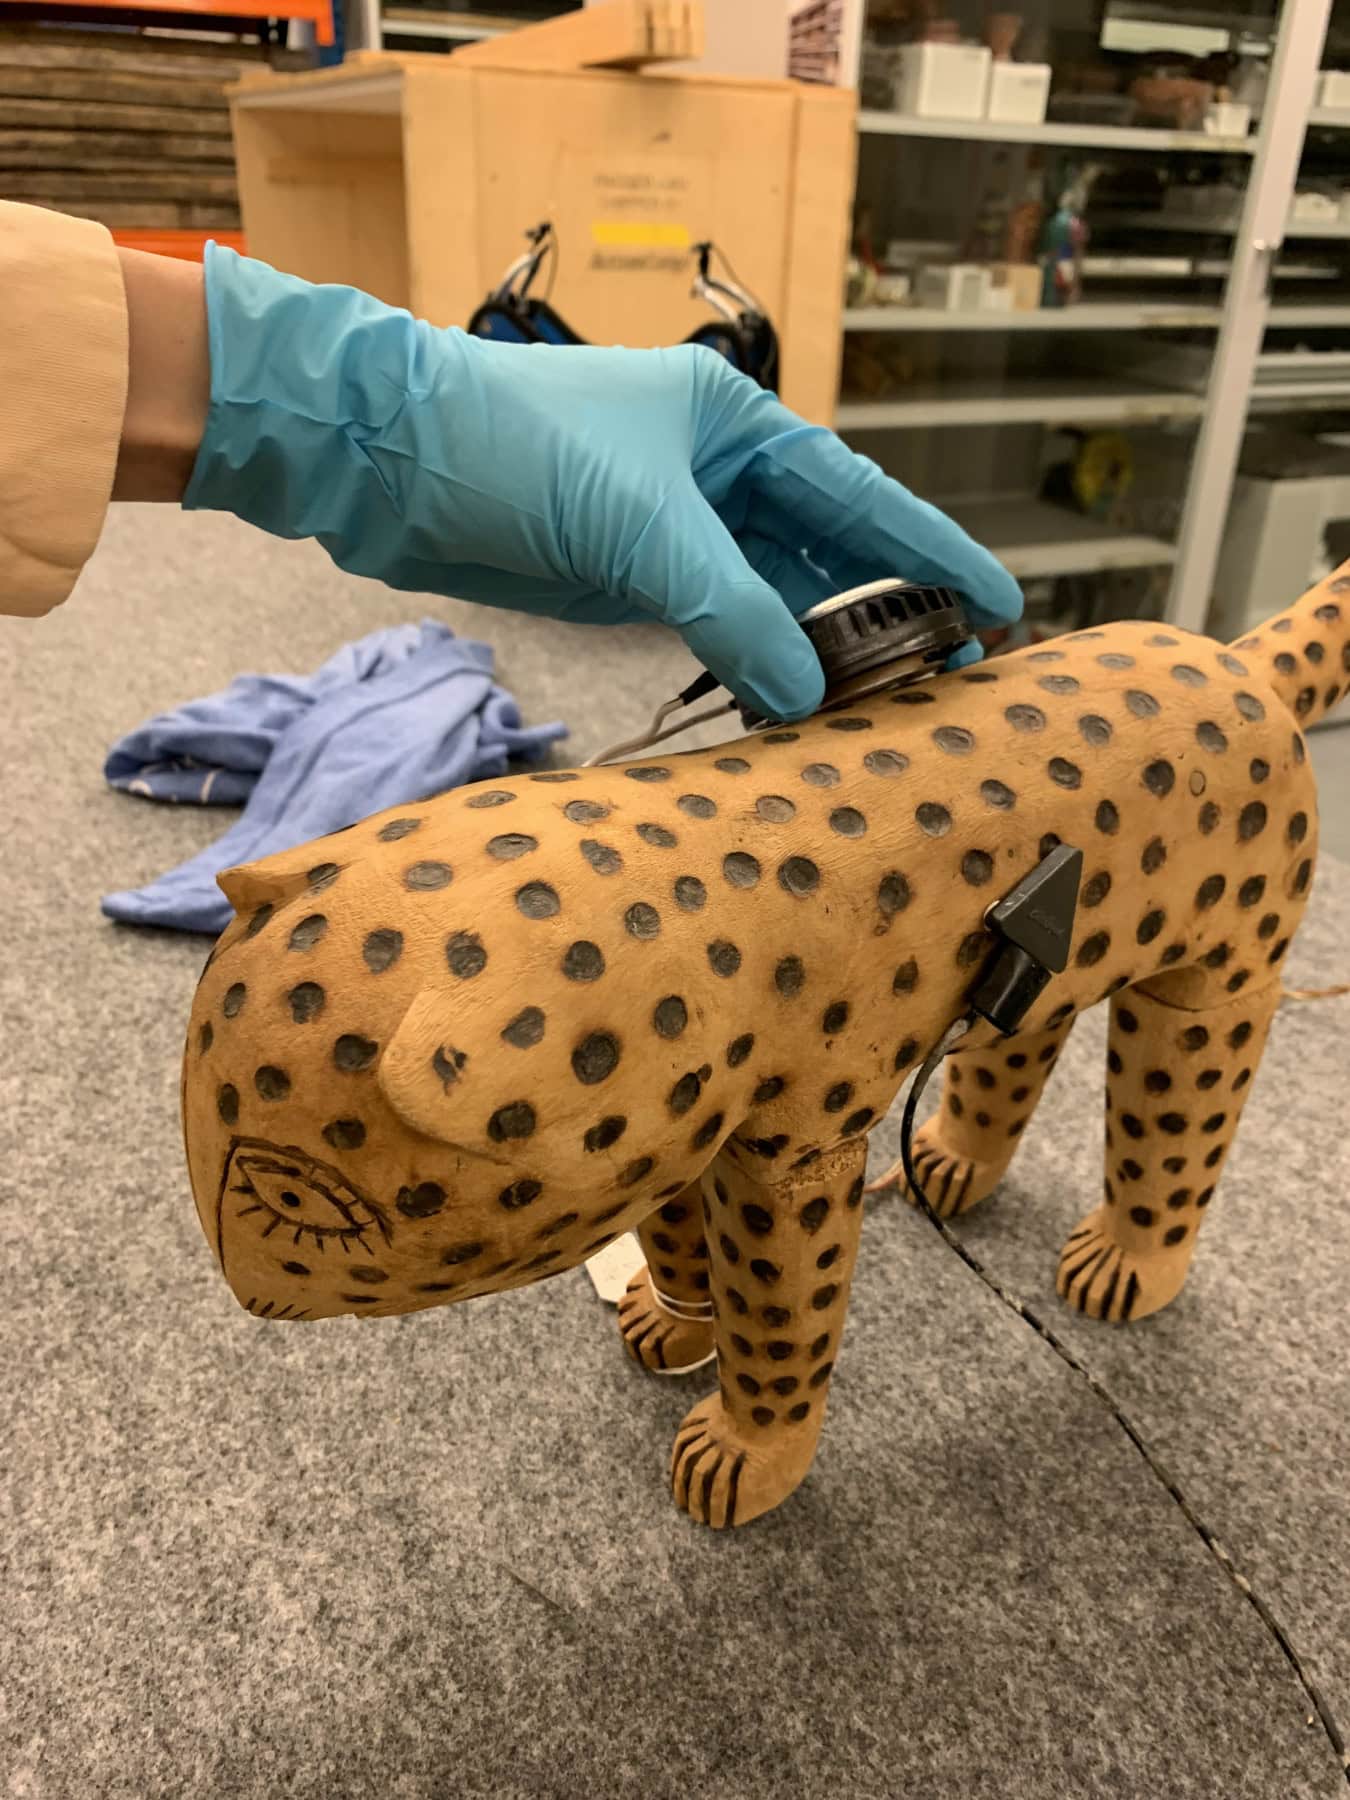 a sculpture of a leopard with a small speaker and microphone attached. A hand with a blue glove in the background